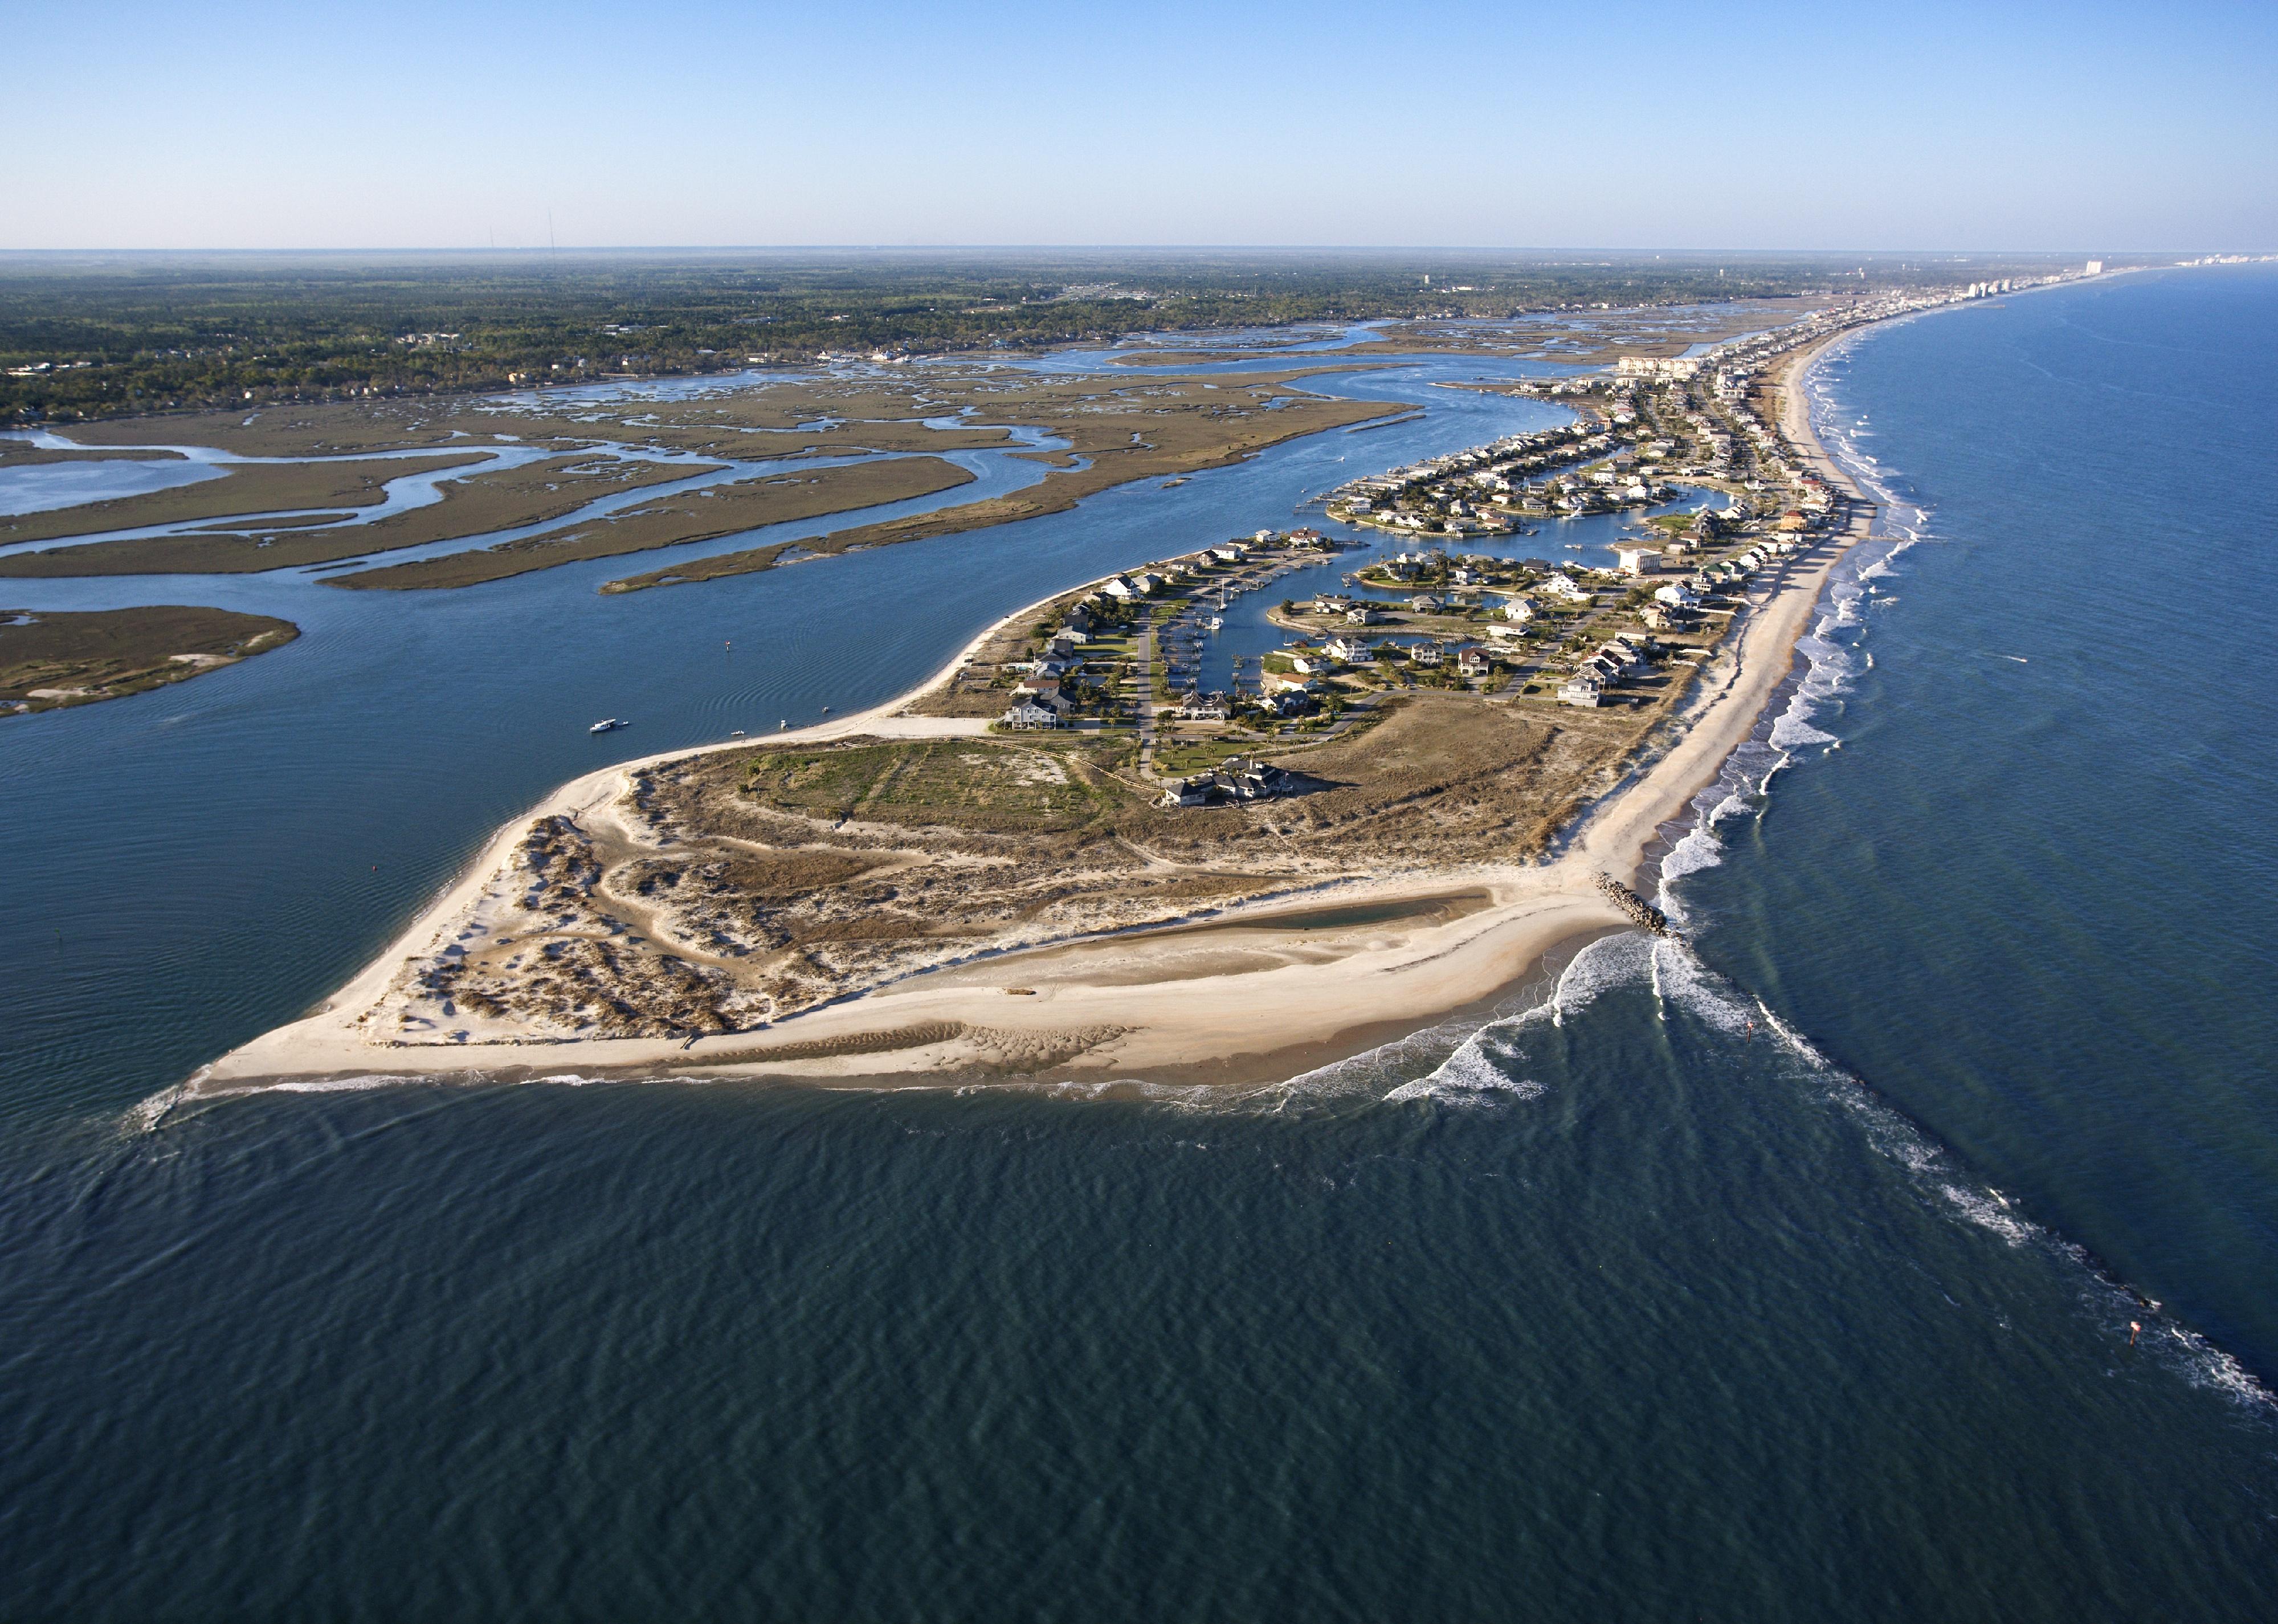 Aerial view of peninsula with beach and buildings in Murrells Inlet.